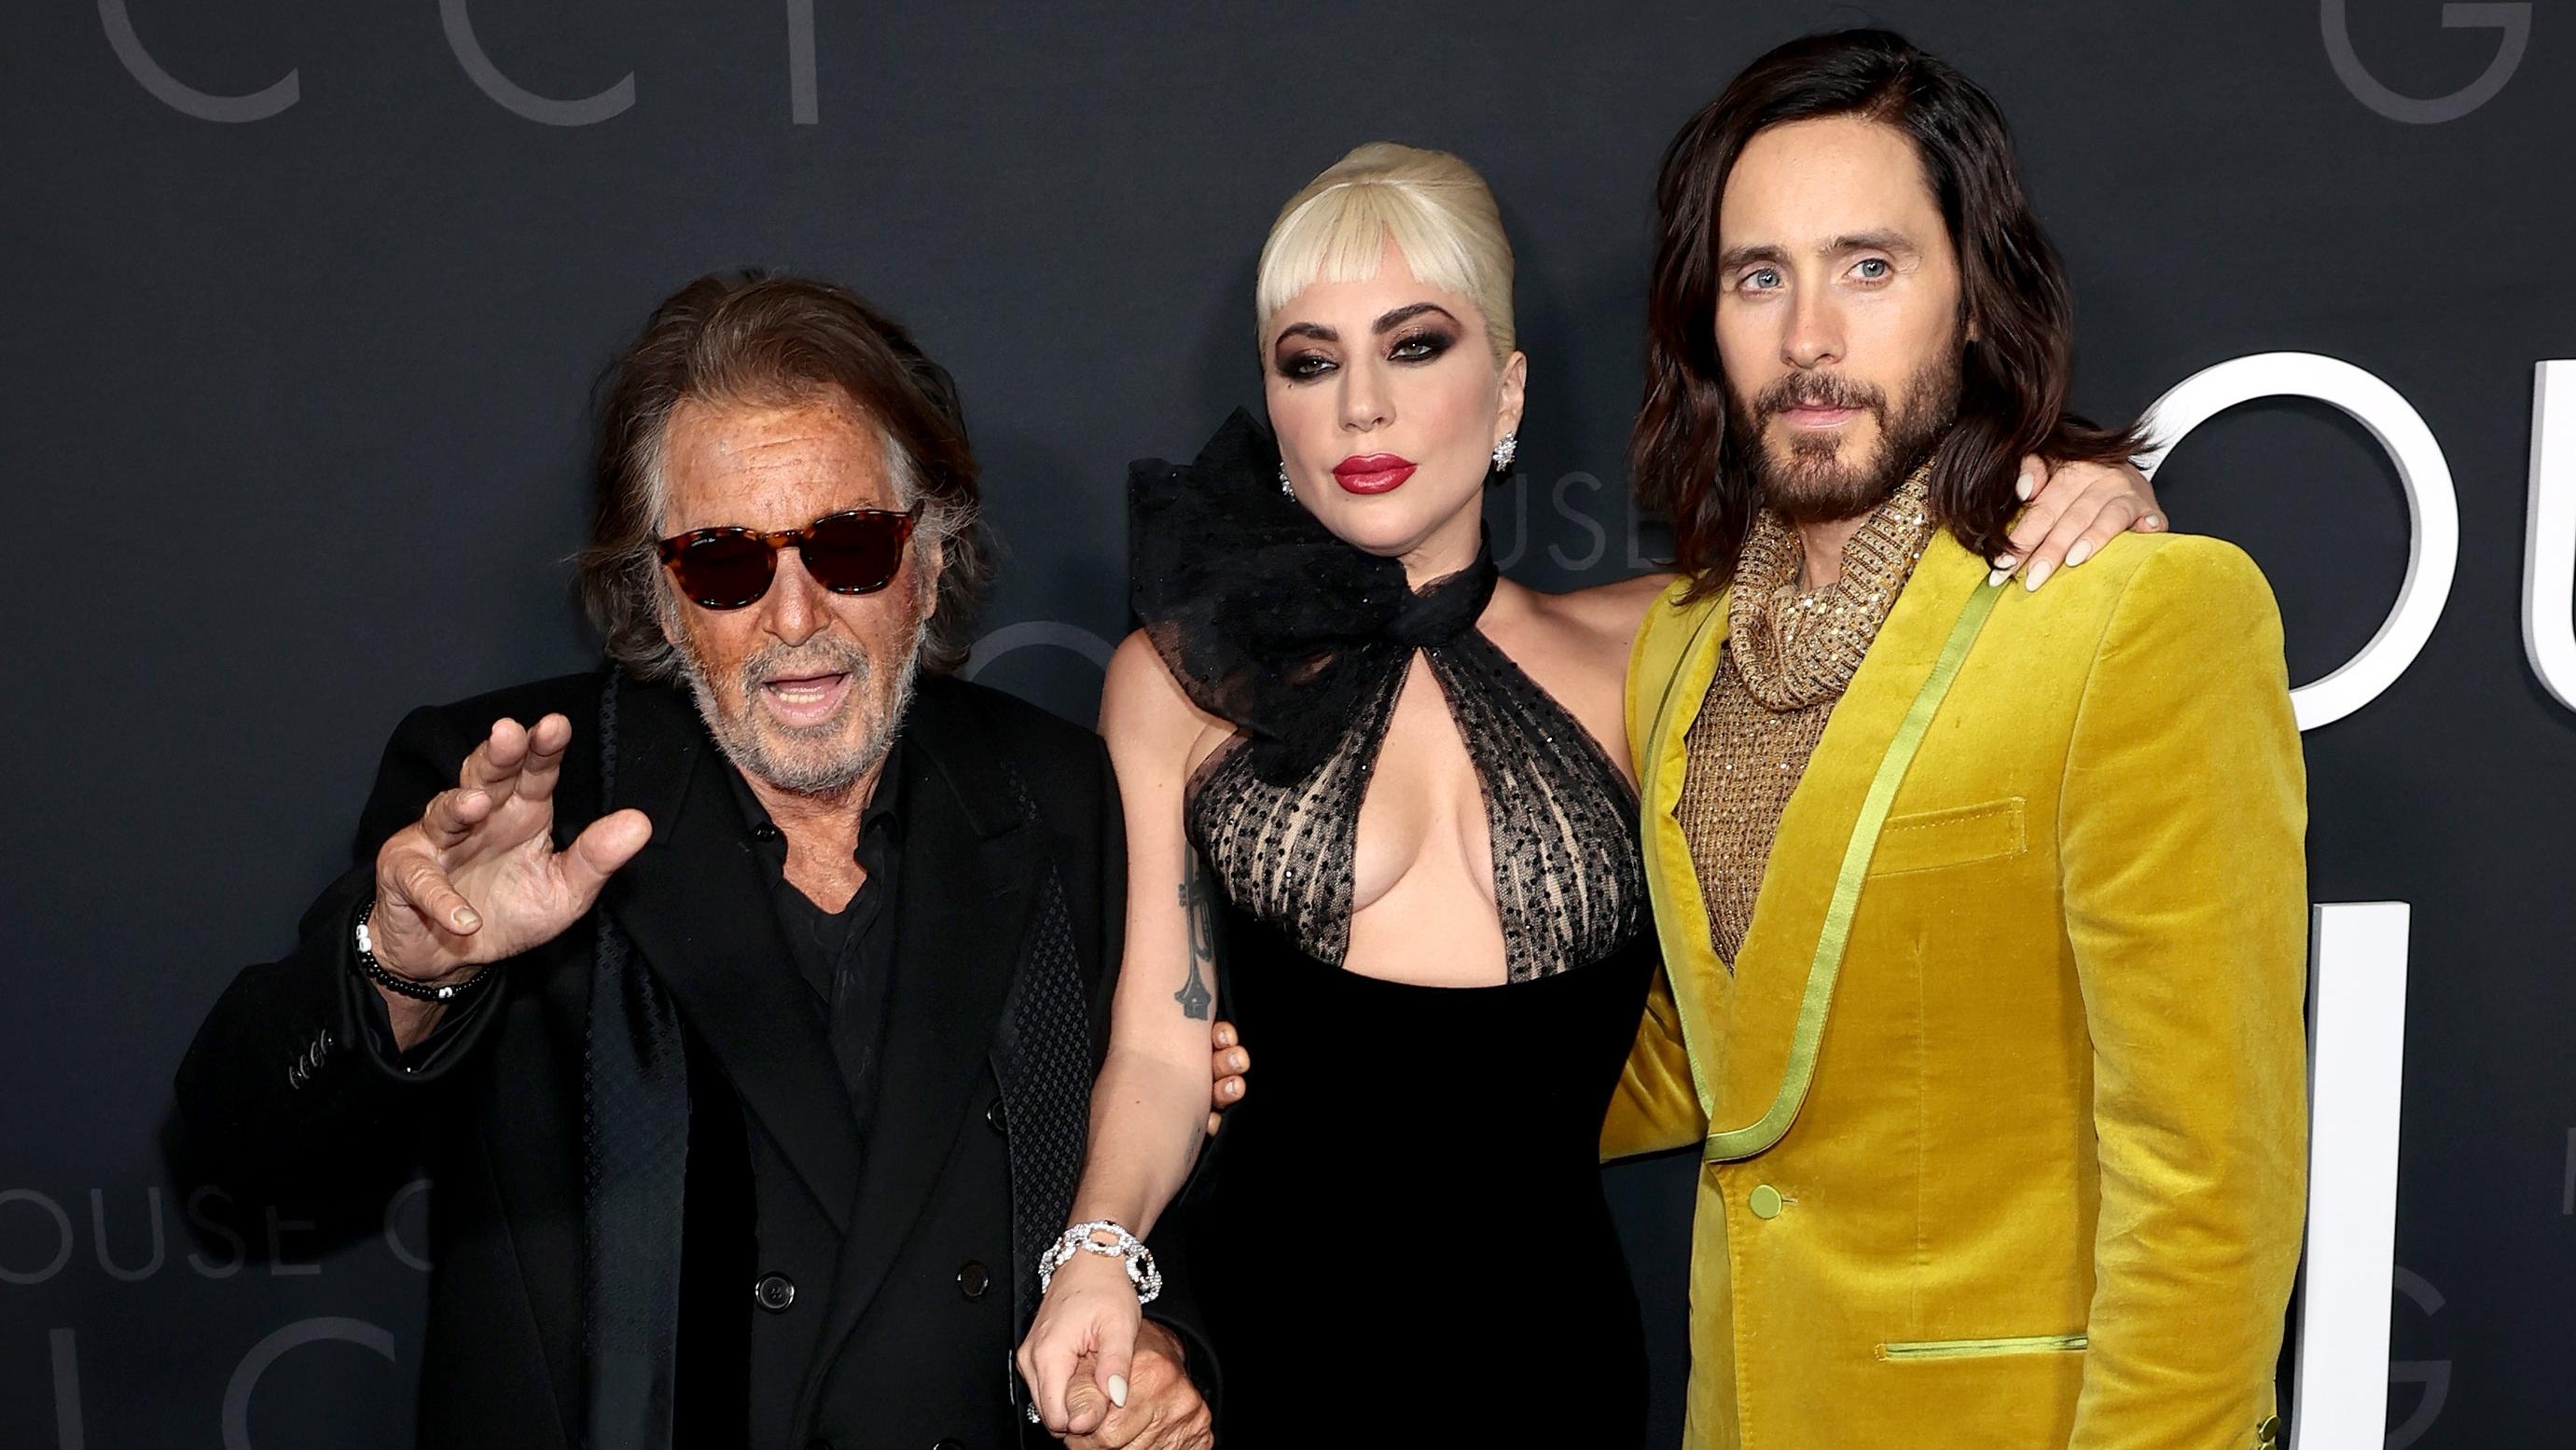 Method actor Lady Gaga says she “never met” Jared Leto on the set of House Of Gucci